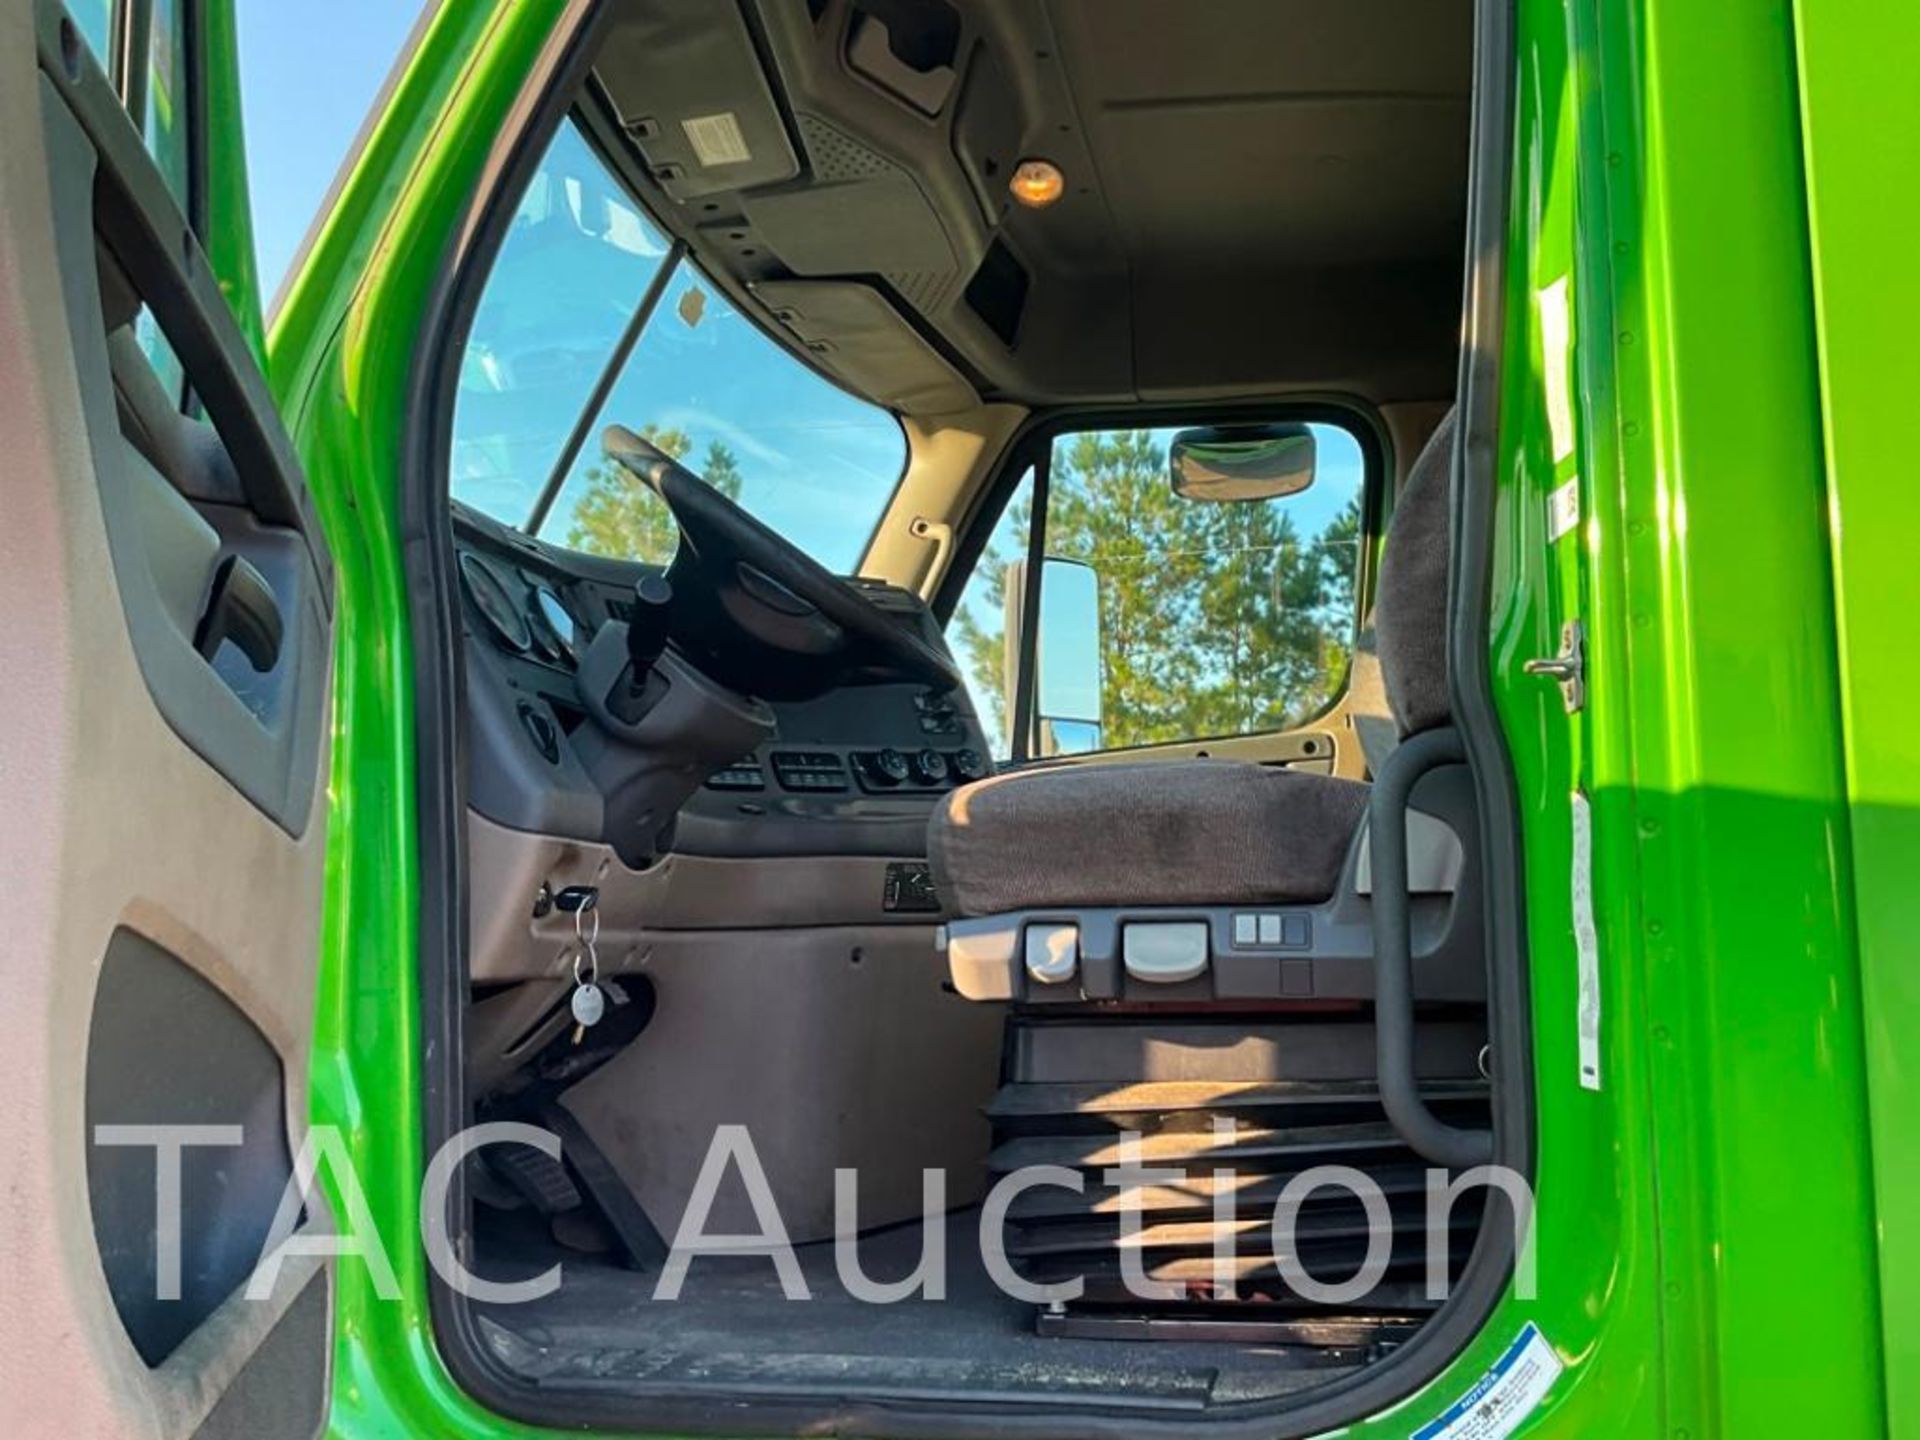 2017 Freightliner Cascadia Day Cab - Image 23 of 114